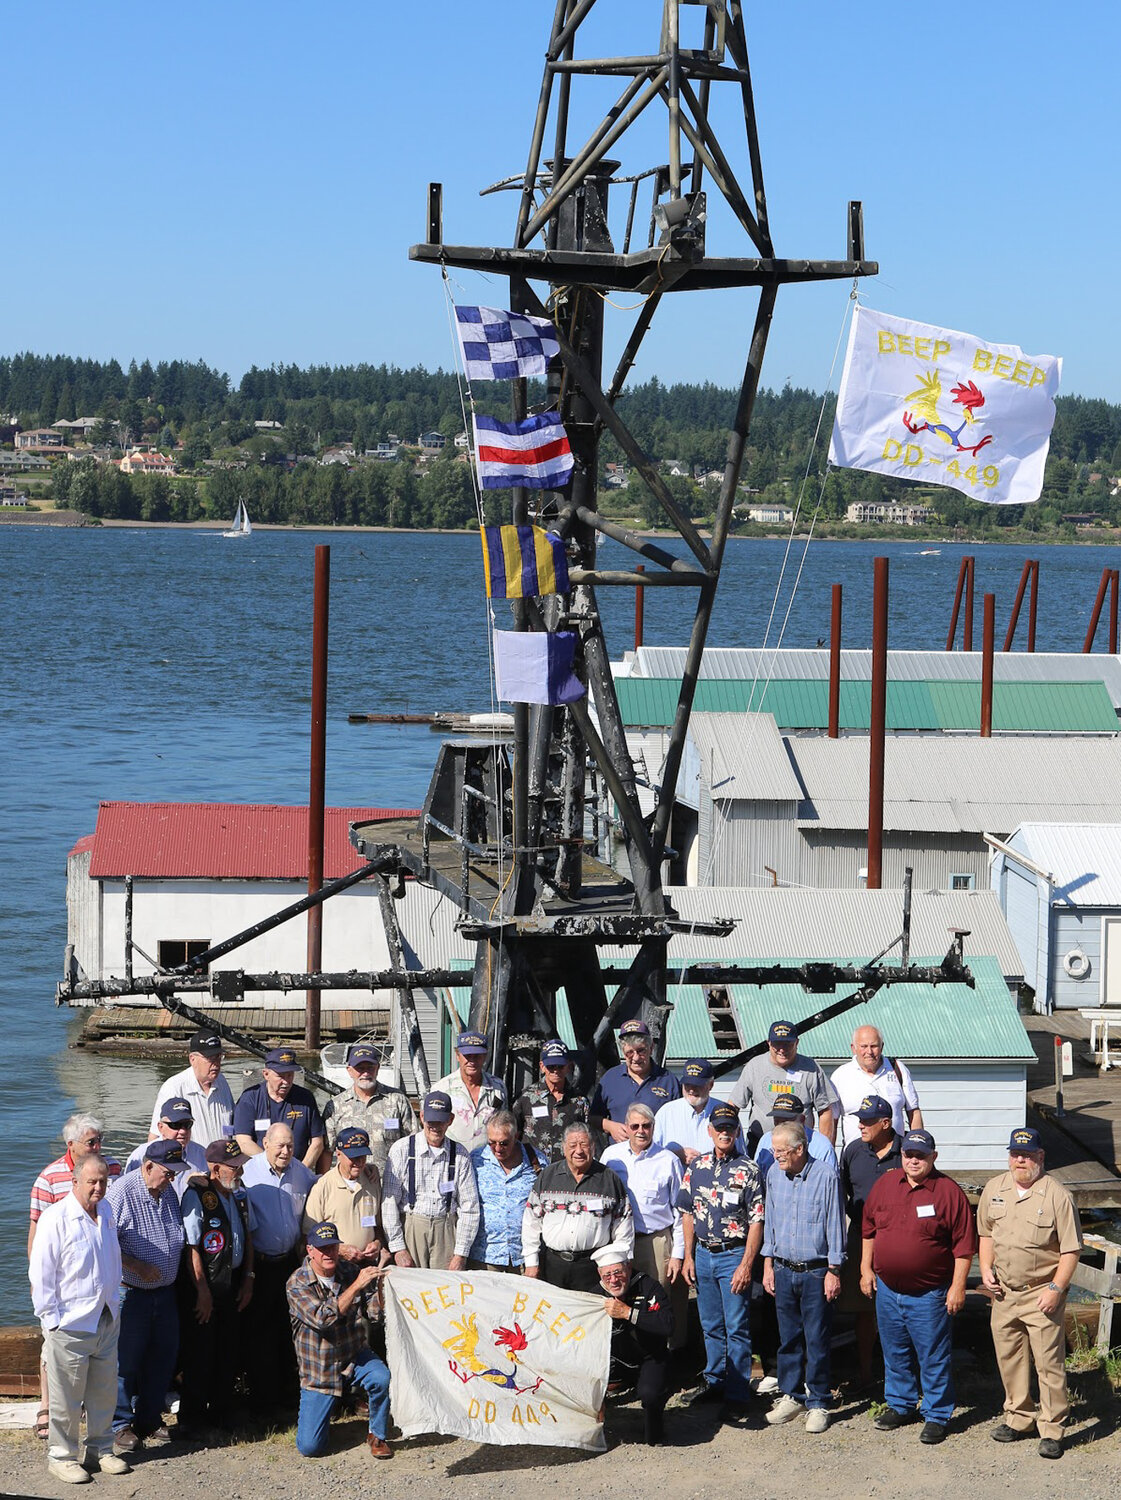 Members of the U.S.S. Nicholas Veterans Association pose with the ship's mast in Portland before disassembling it and moving it up to the Veterans Memorial Museum in Chehalis to be displayed. Photo courtesy John Bailey.